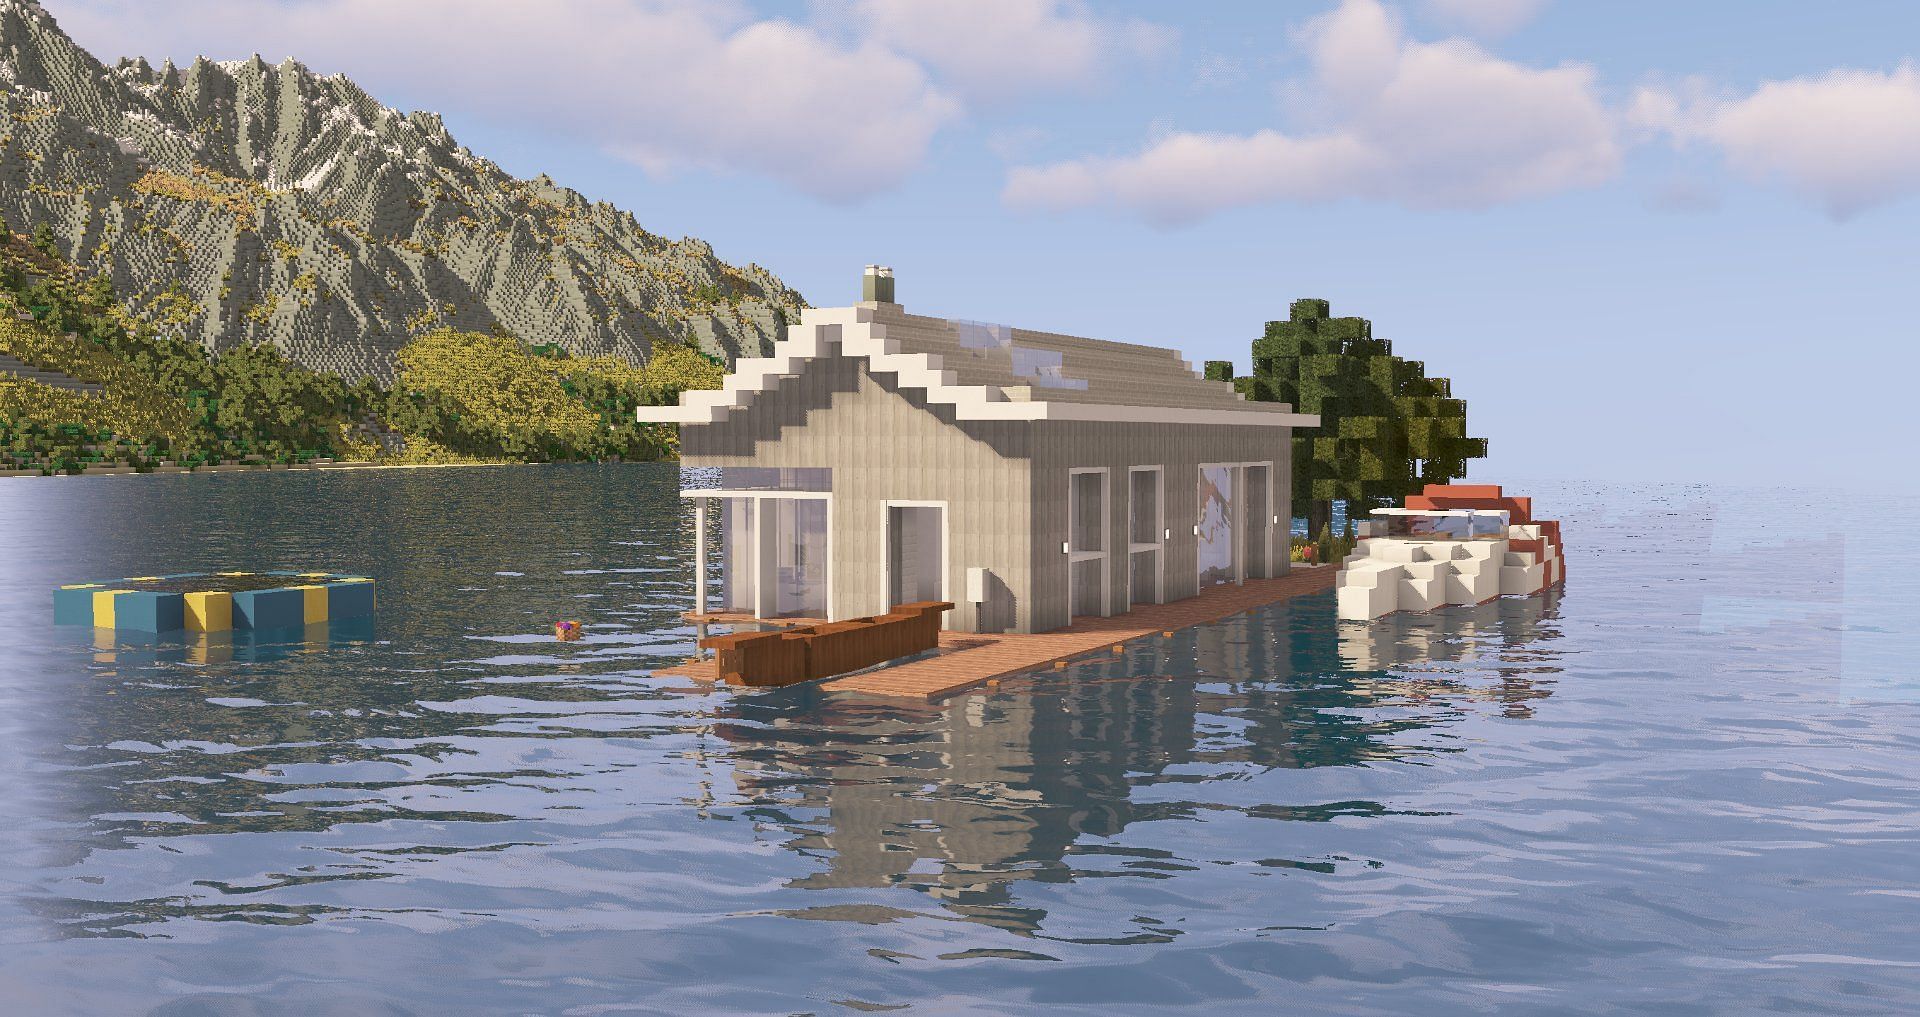 Boathouse design on the water [Image via TotallyNotMe on Twitter]